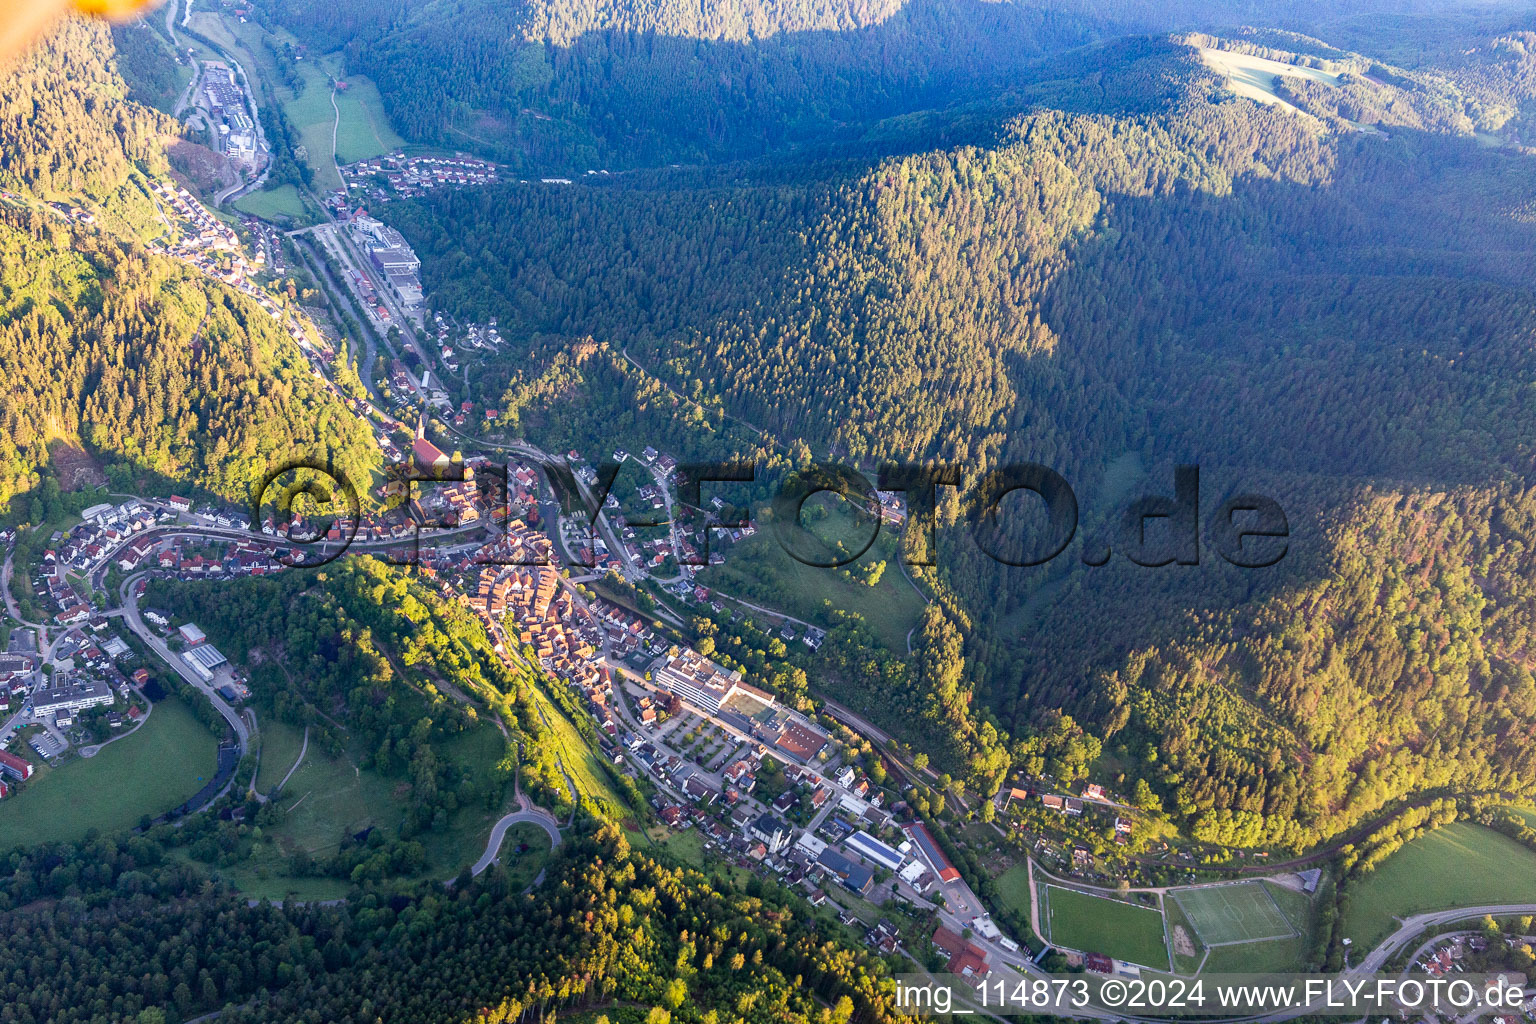 Location view of the streets and houses of residential areas in the valley landscape surrounded by mountains in Schiltach in the state Baden-Wurttemberg, Germany